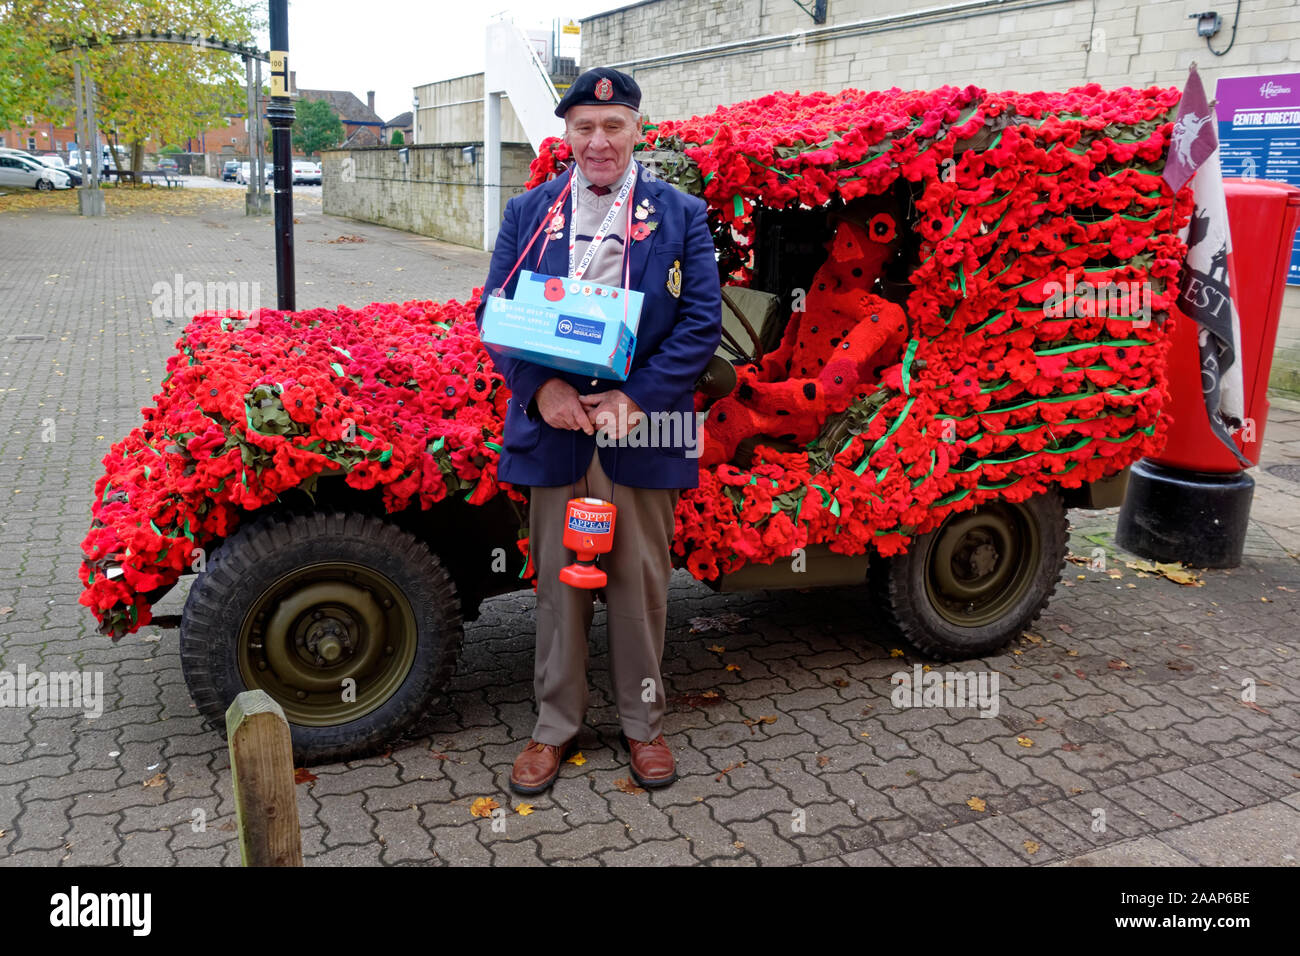 Poppy seller Arthur Smith from Heytesbury stands in front of his WW2 American military jeep adorned with knitted poppies Stock Photo